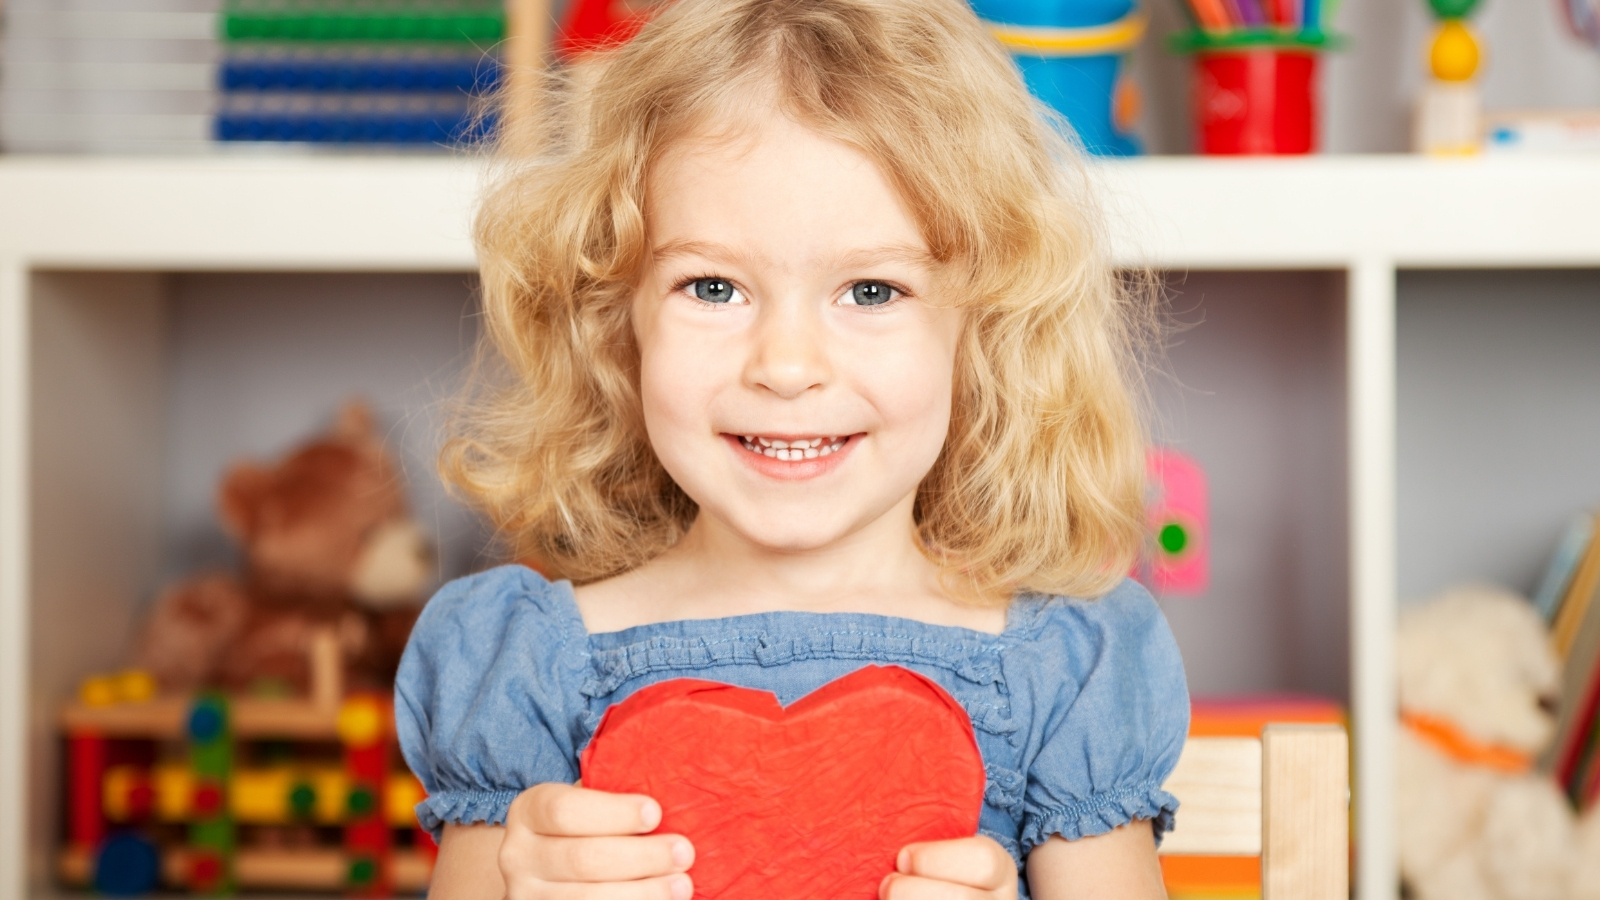 8 fun and creative Valentine’s Day activities for kids